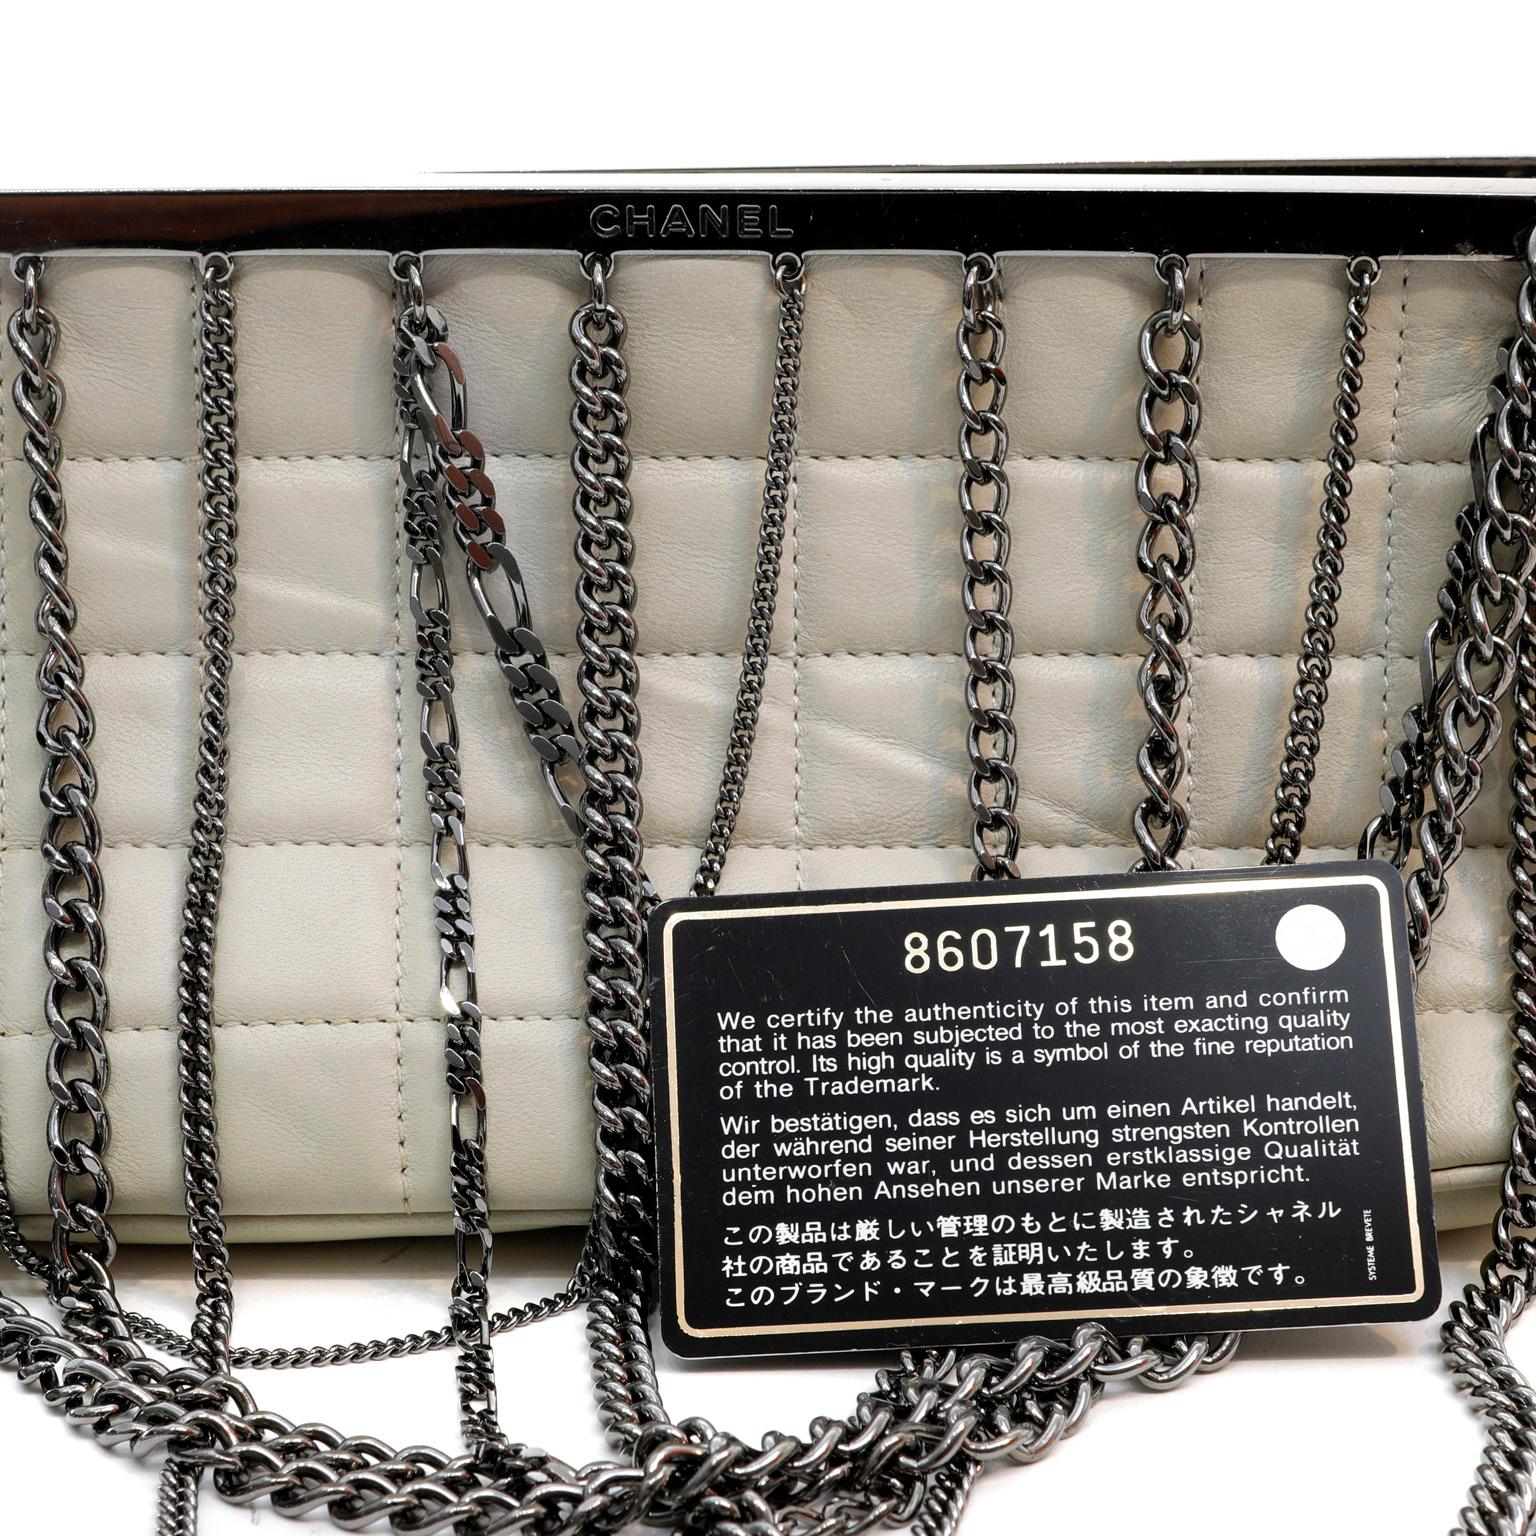 Gray Chanel Stone Quilted Leather Dripping Chains Bag